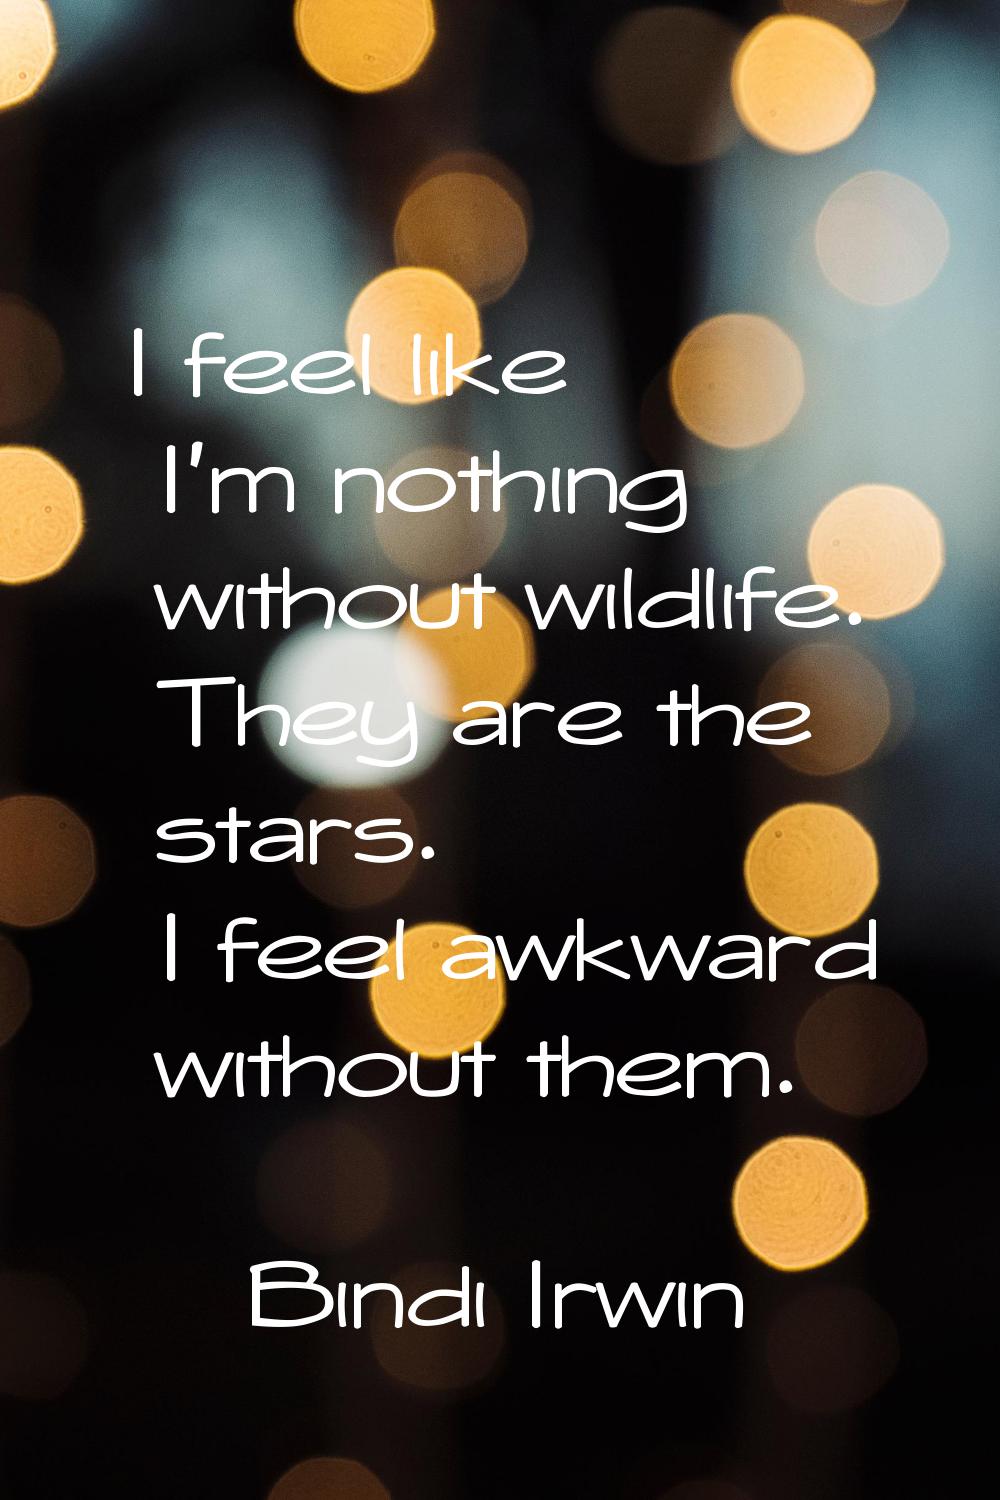 I feel like I'm nothing without wildlife. They are the stars. I feel awkward without them.